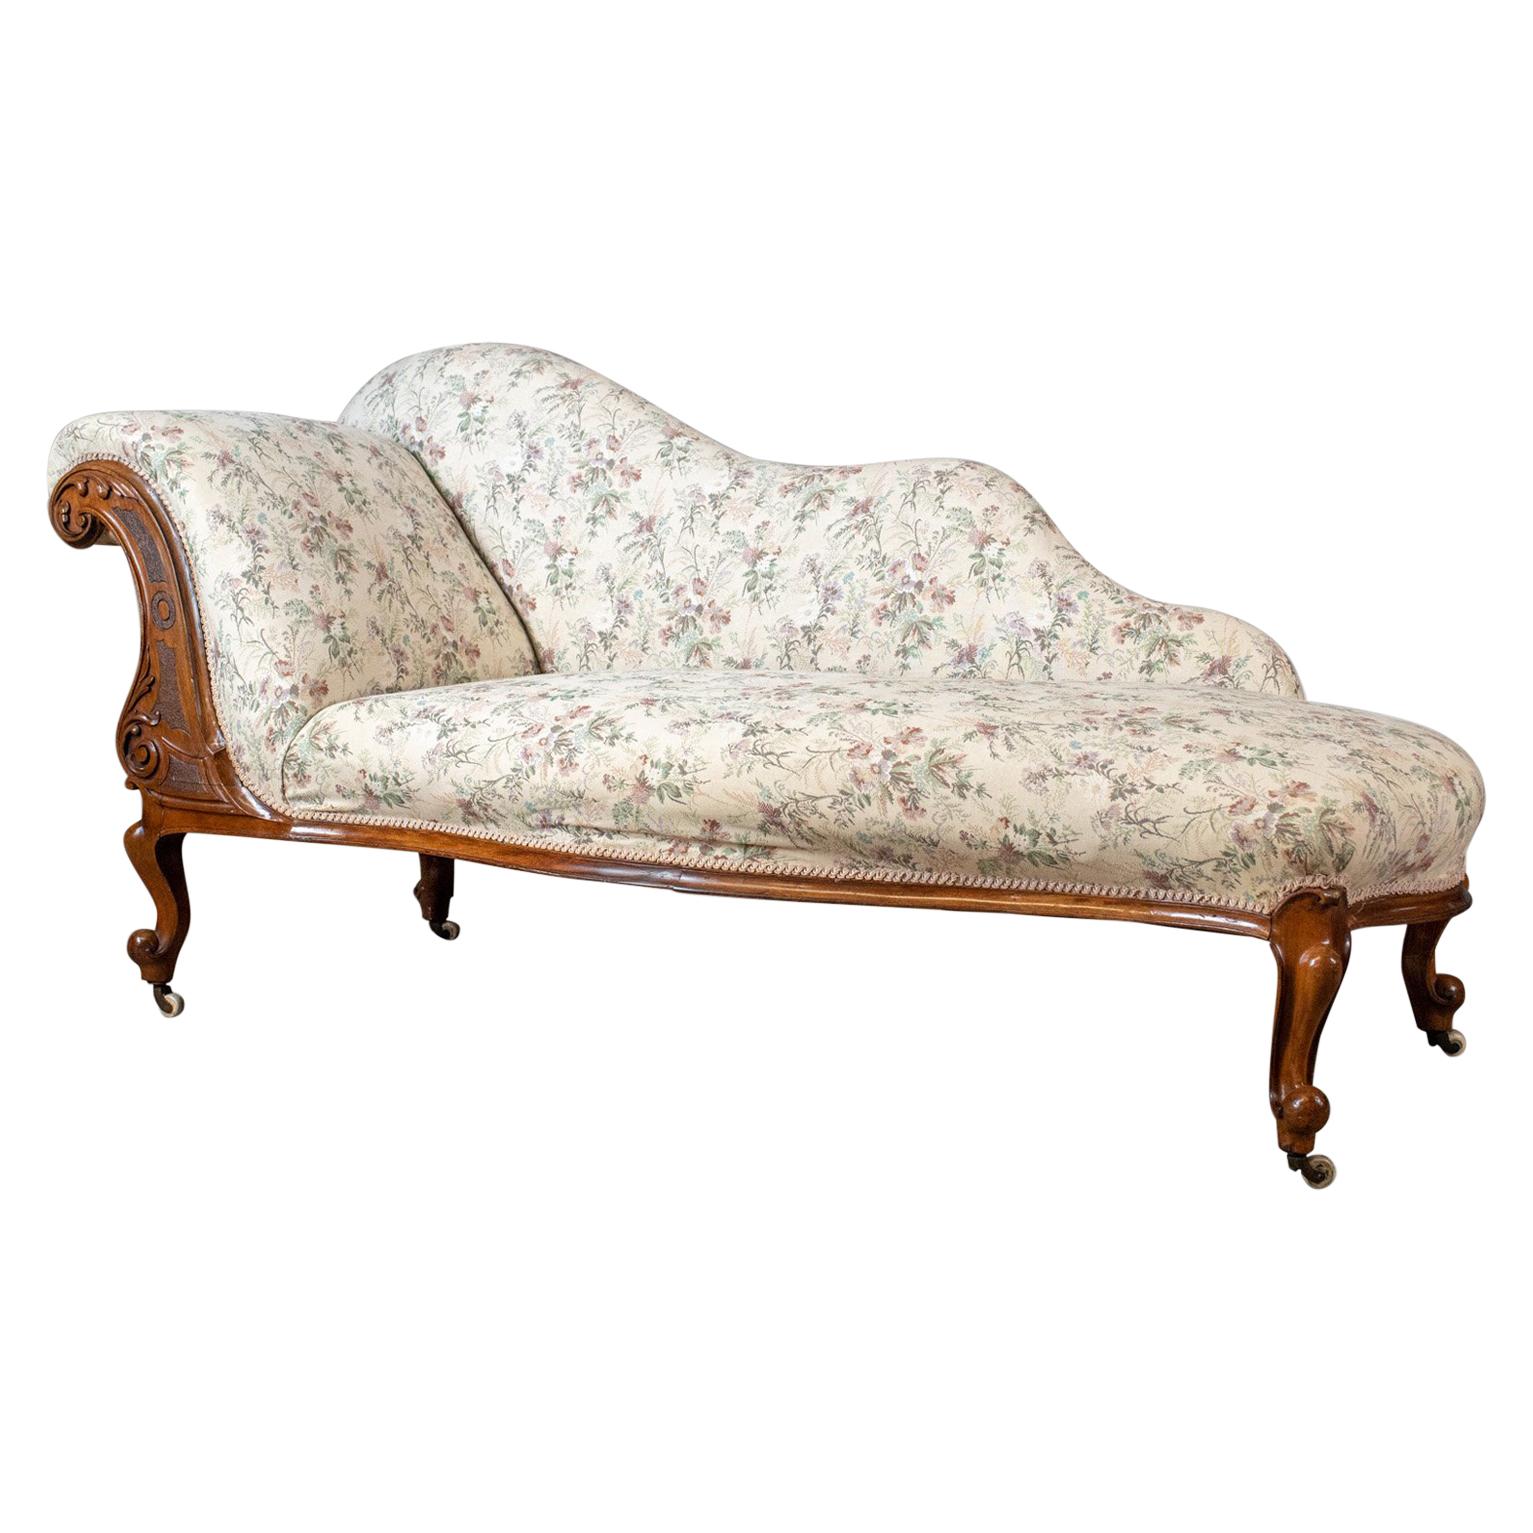 Antique Chaise Longue, English, Late Regency Day Bed, Walnut, circa 1830